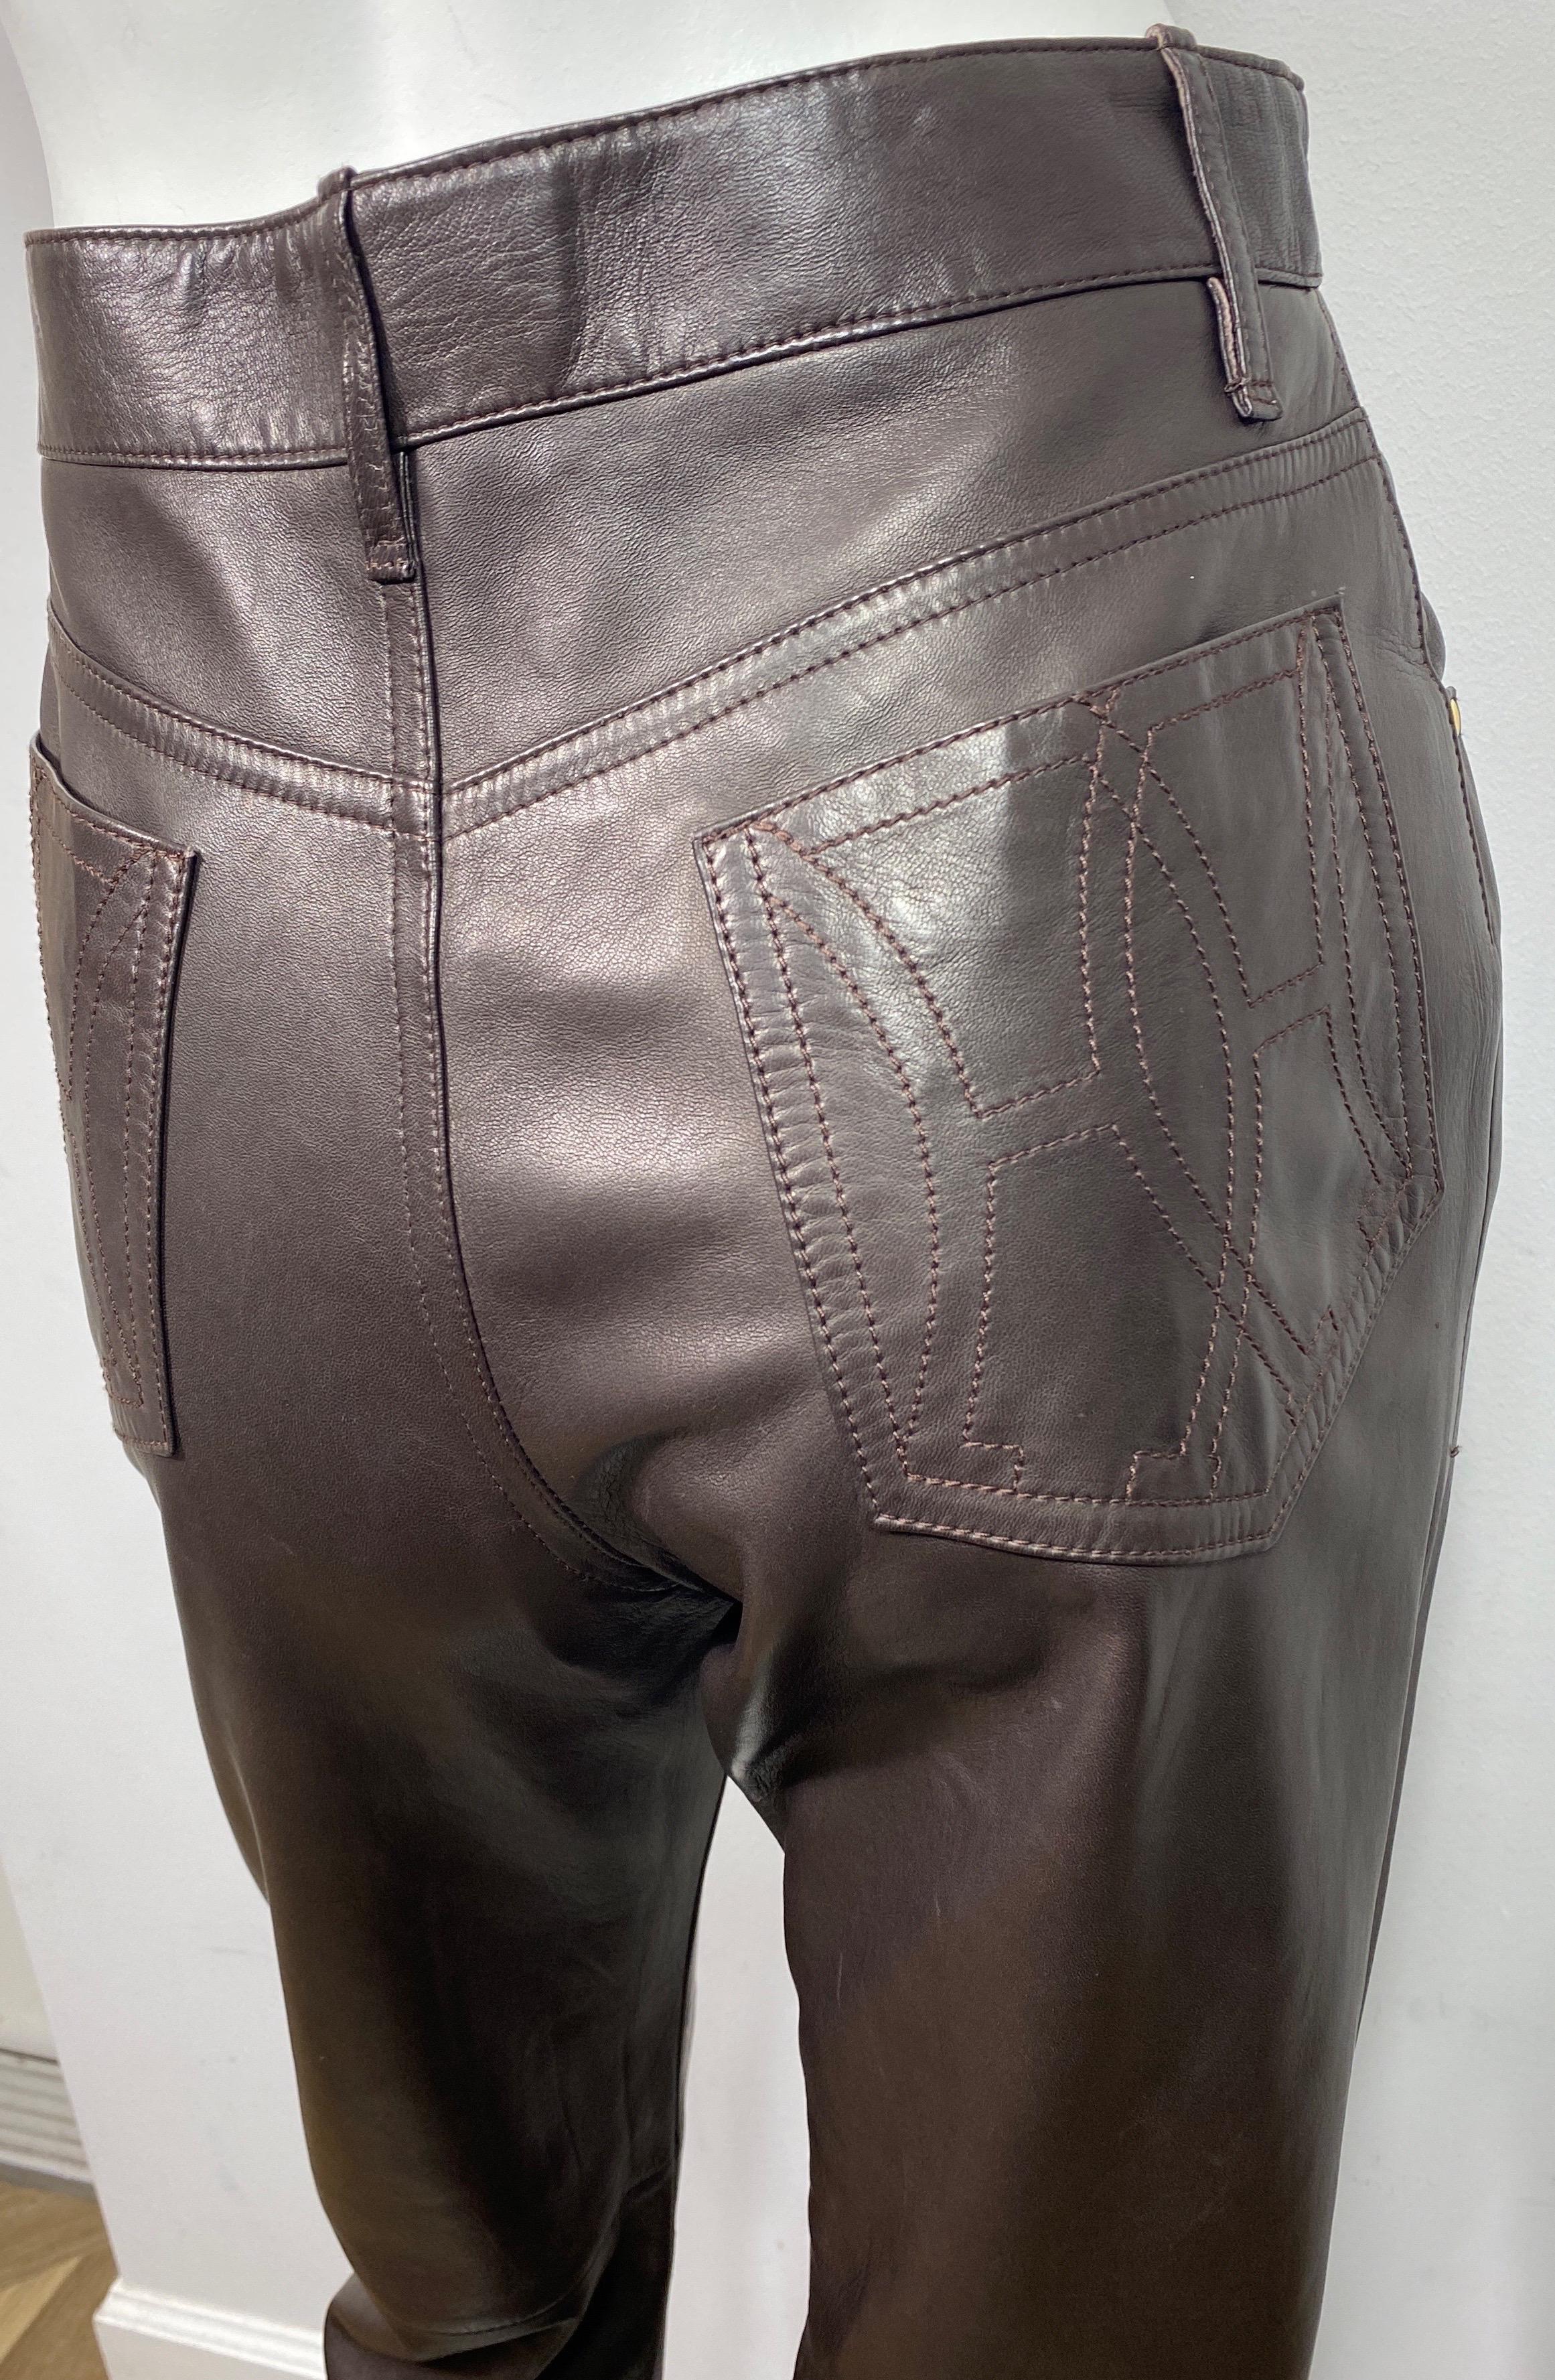 Hermes 1990’s Vintage Chocolate Brown Jean Style Leather Pants - Size 42 For Sale 9